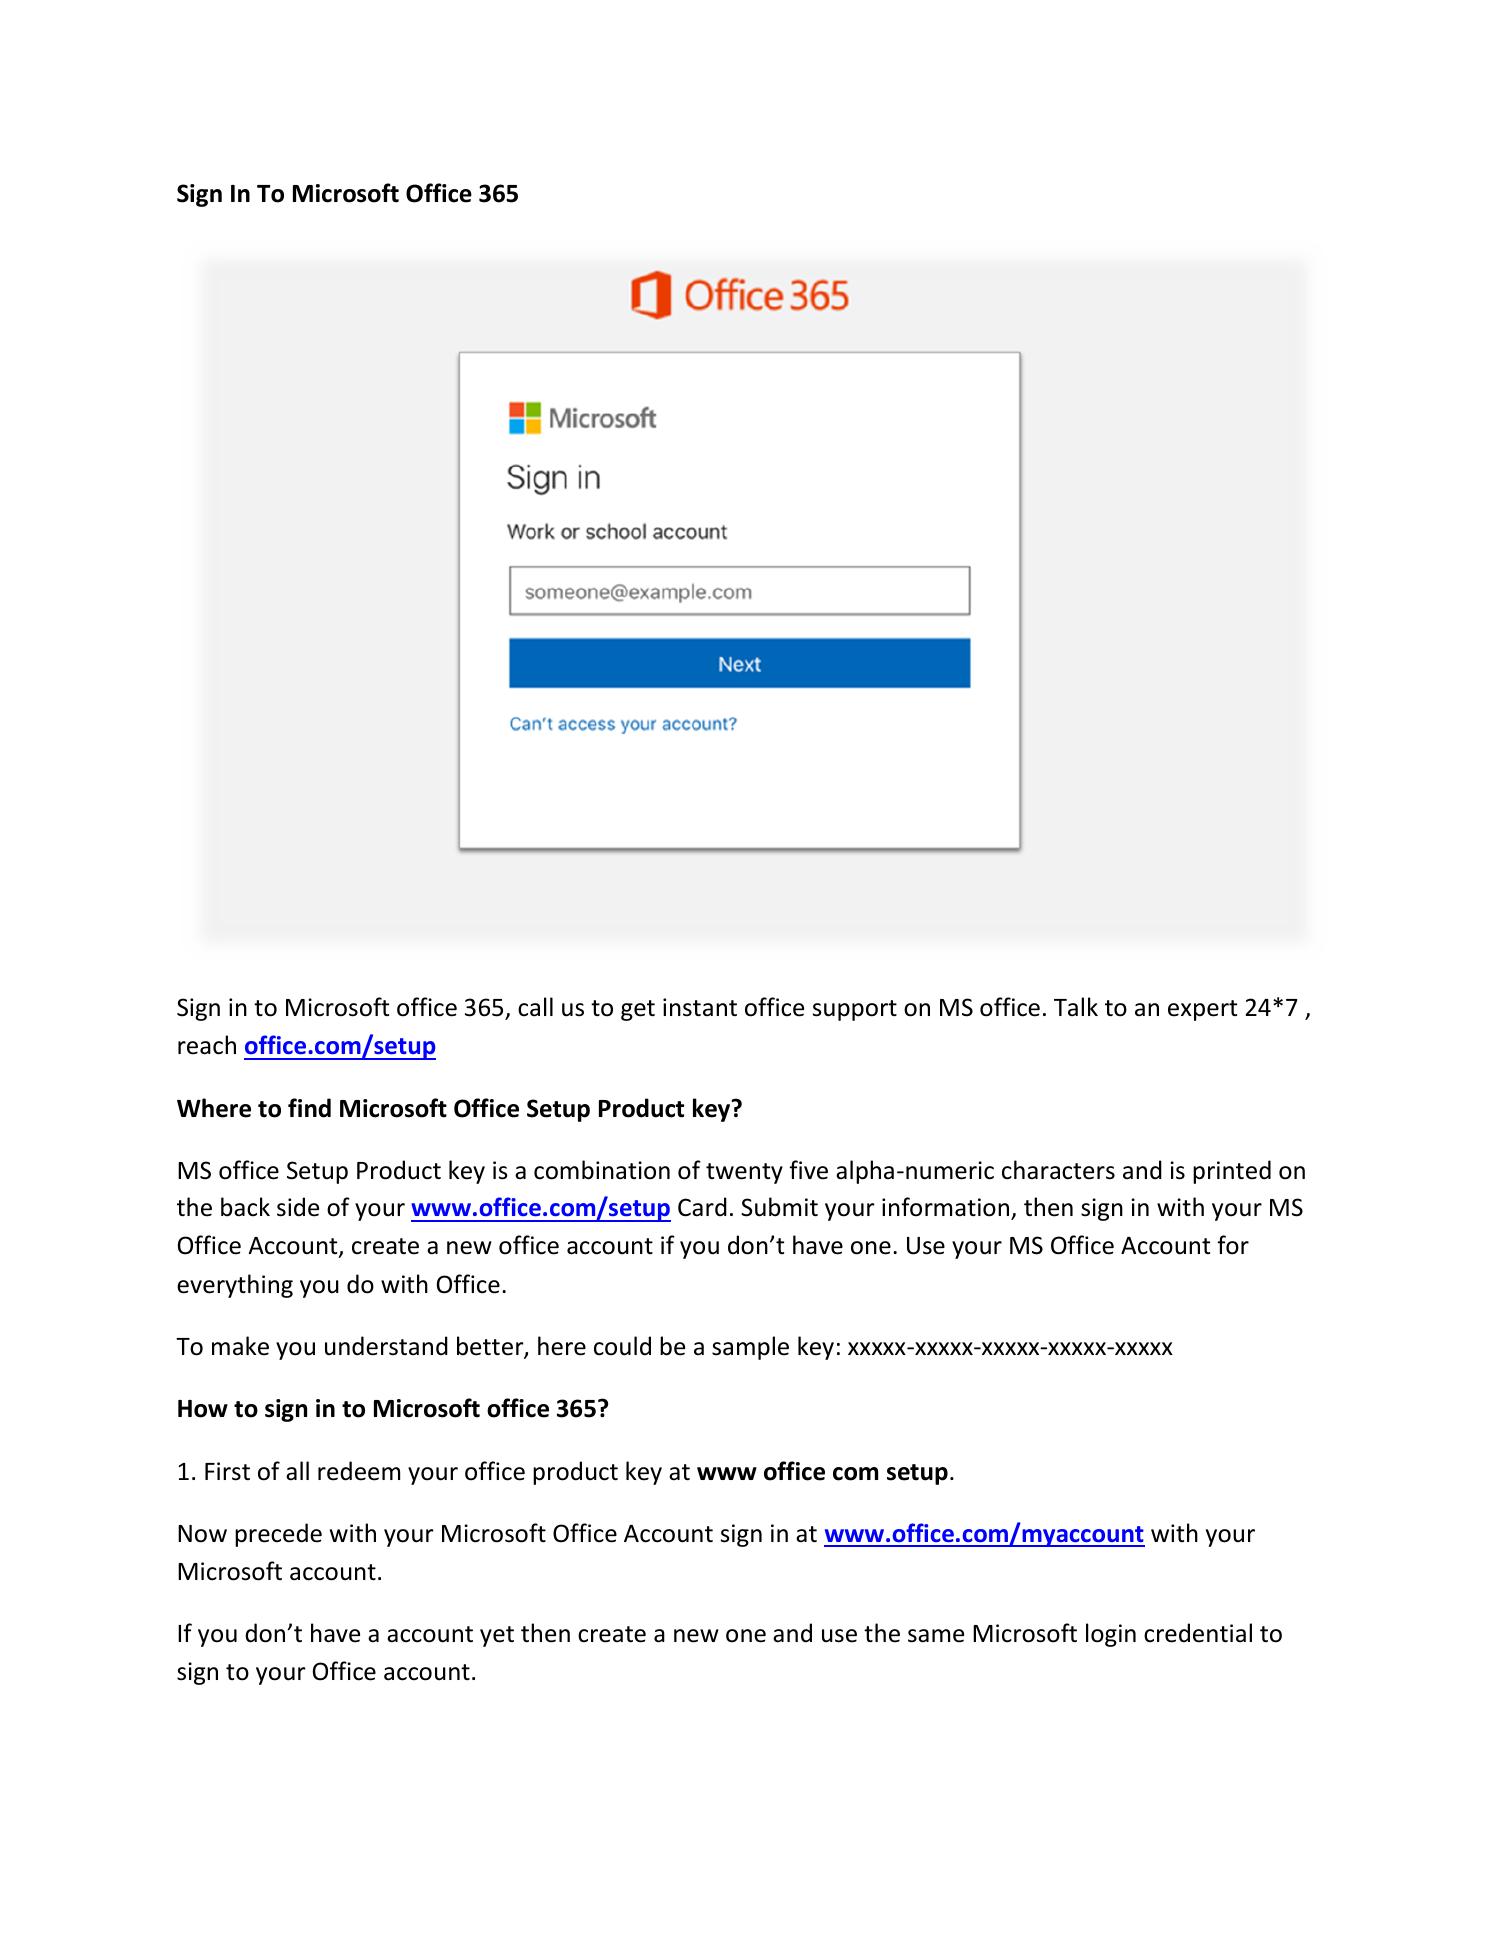 sign in office 365